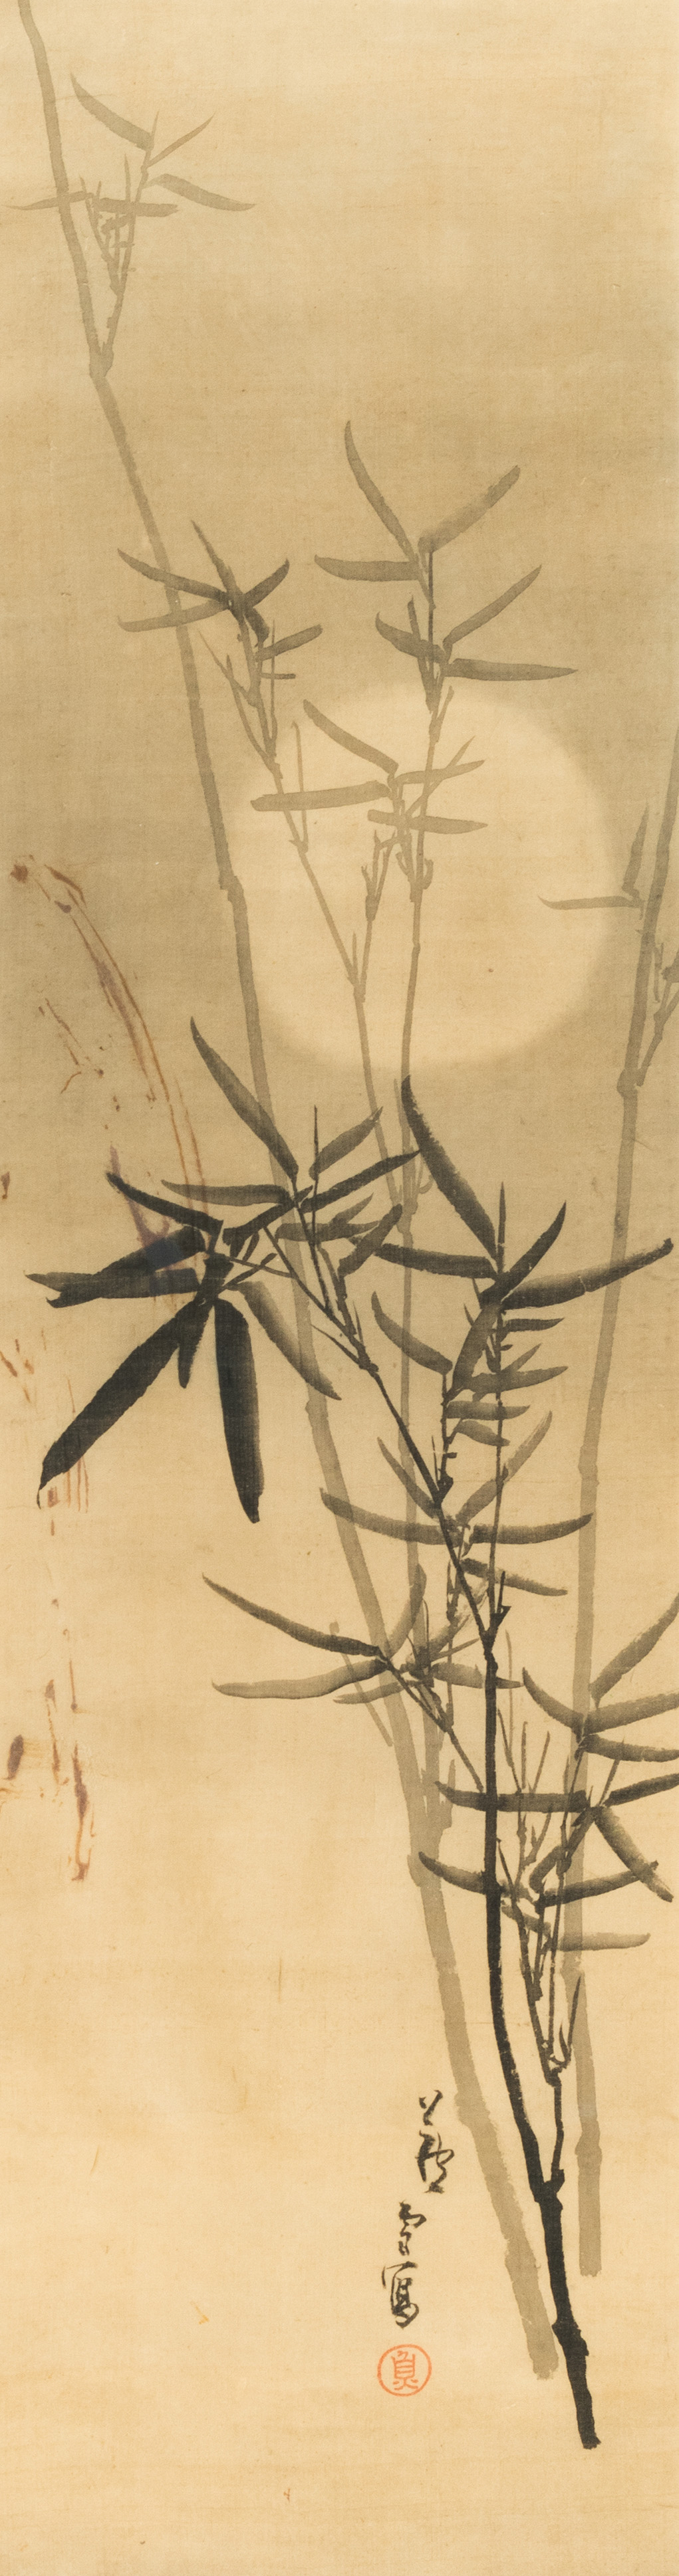 IN THE STYLE OF NAGASAWA RÔSETSU (1754-1799): BAMBOO UNDER A FULL MOON, INK ON SILK